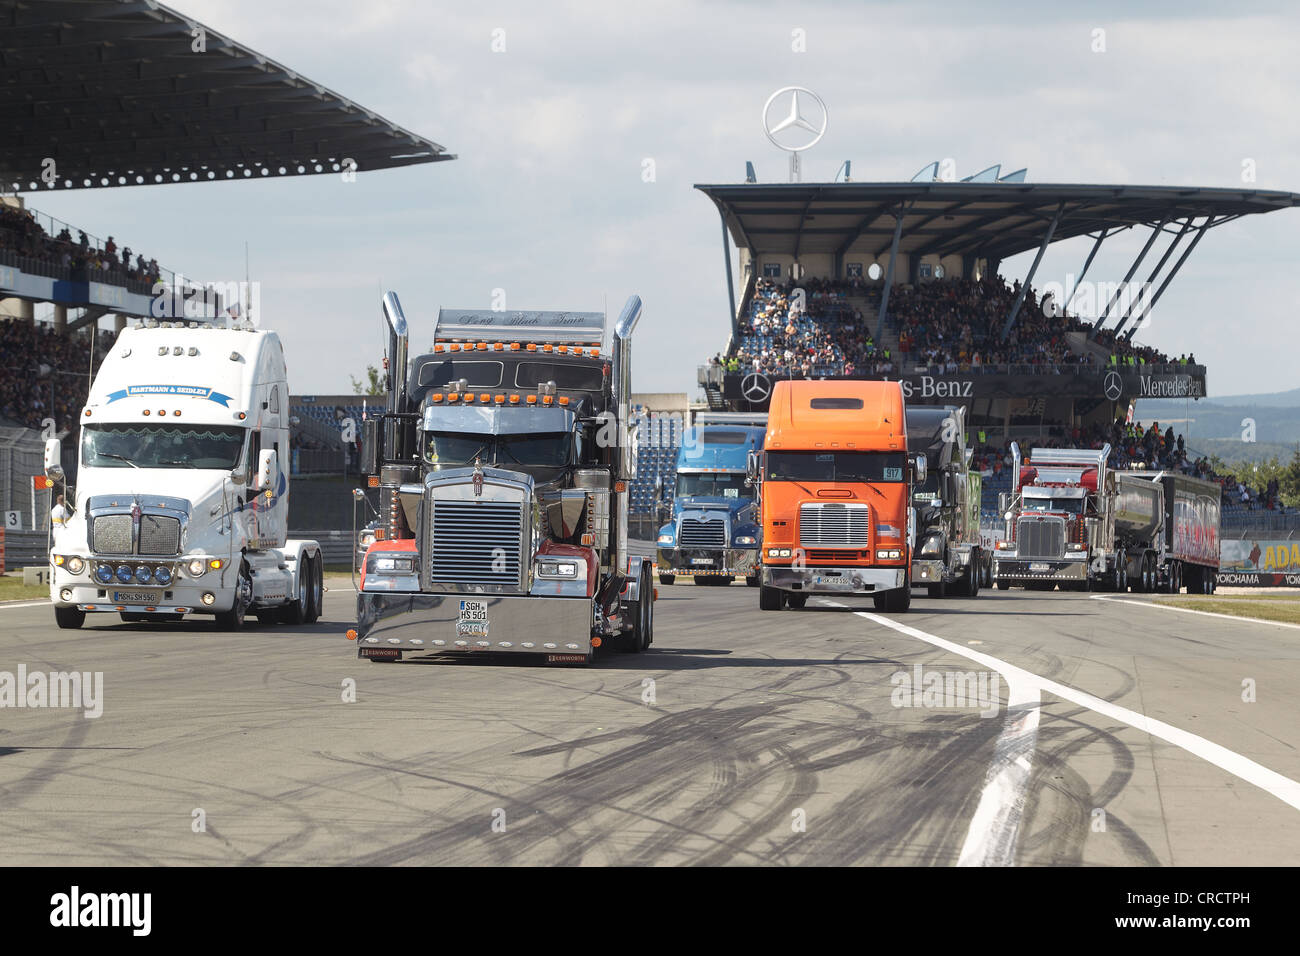 Parade of US trucks at the Truck Grand Prix on the Nuerburgring race track, Rhineland-Palatinate, Germany, Europe Stock Photo